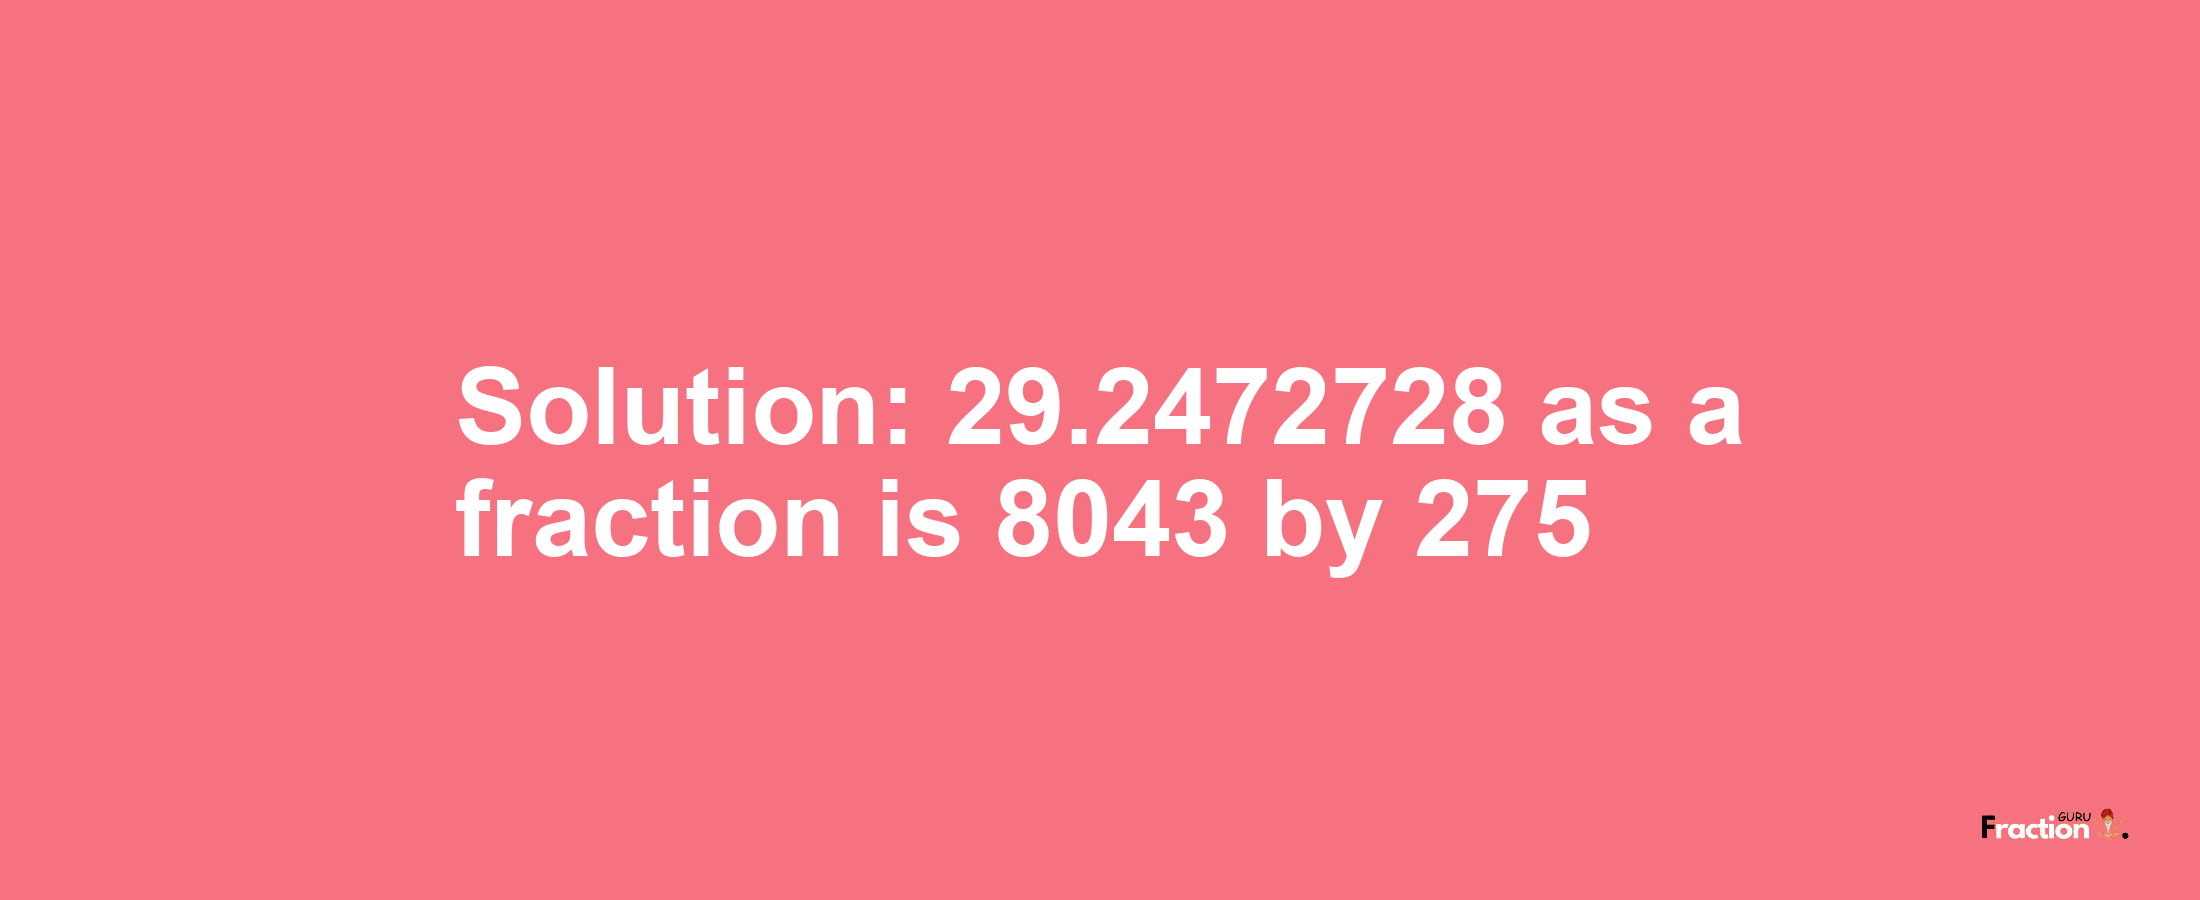 Solution:29.2472728 as a fraction is 8043/275